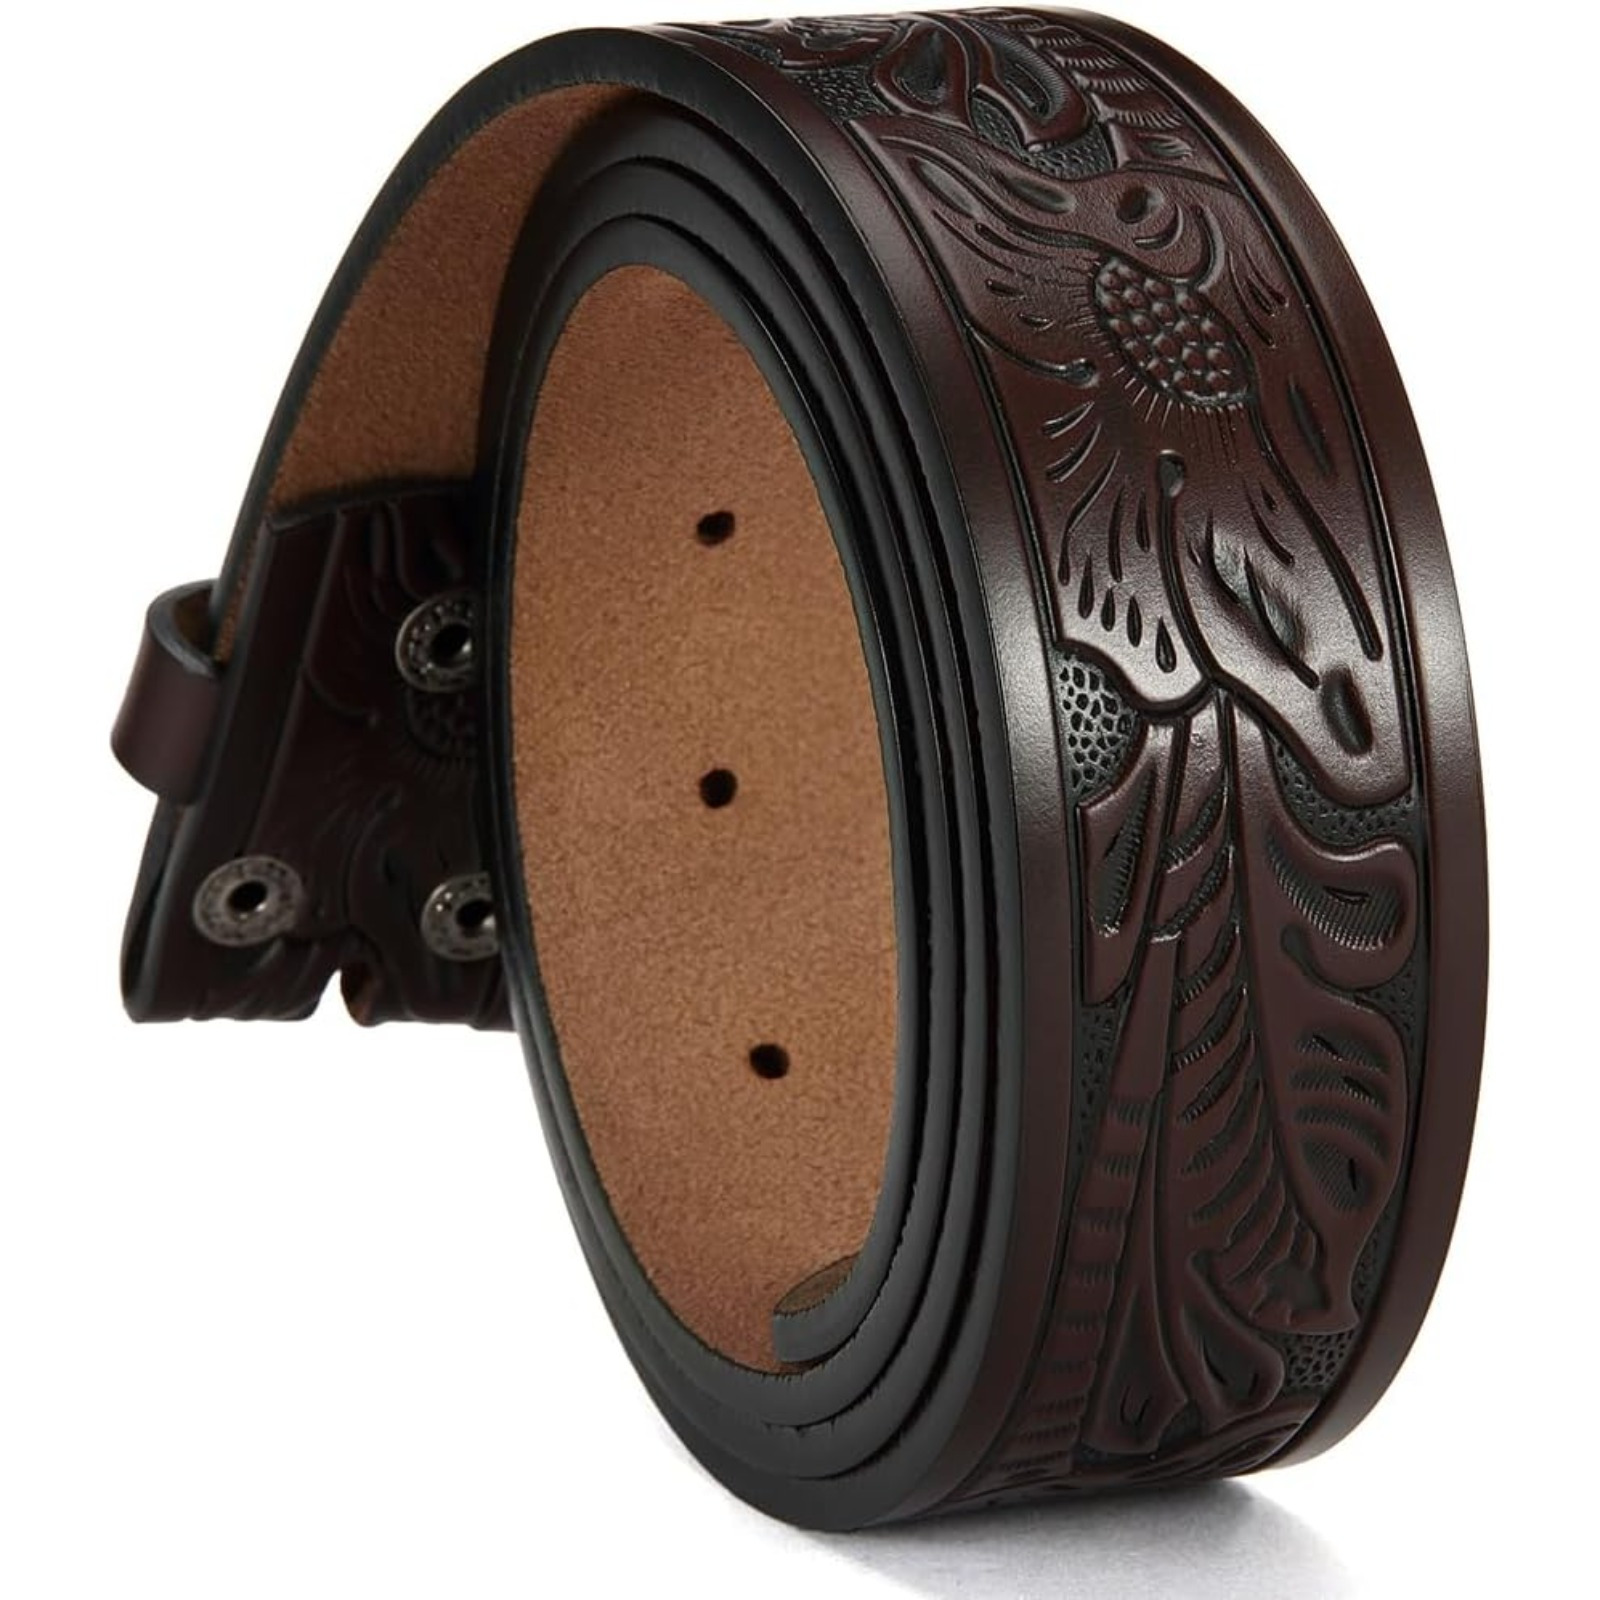 

Chaoren Western Belts For Men Without Buckle - Cowboy Belt 1.5" Full Grain Leather Belt For Jeans - 1 Solid Piece Leather